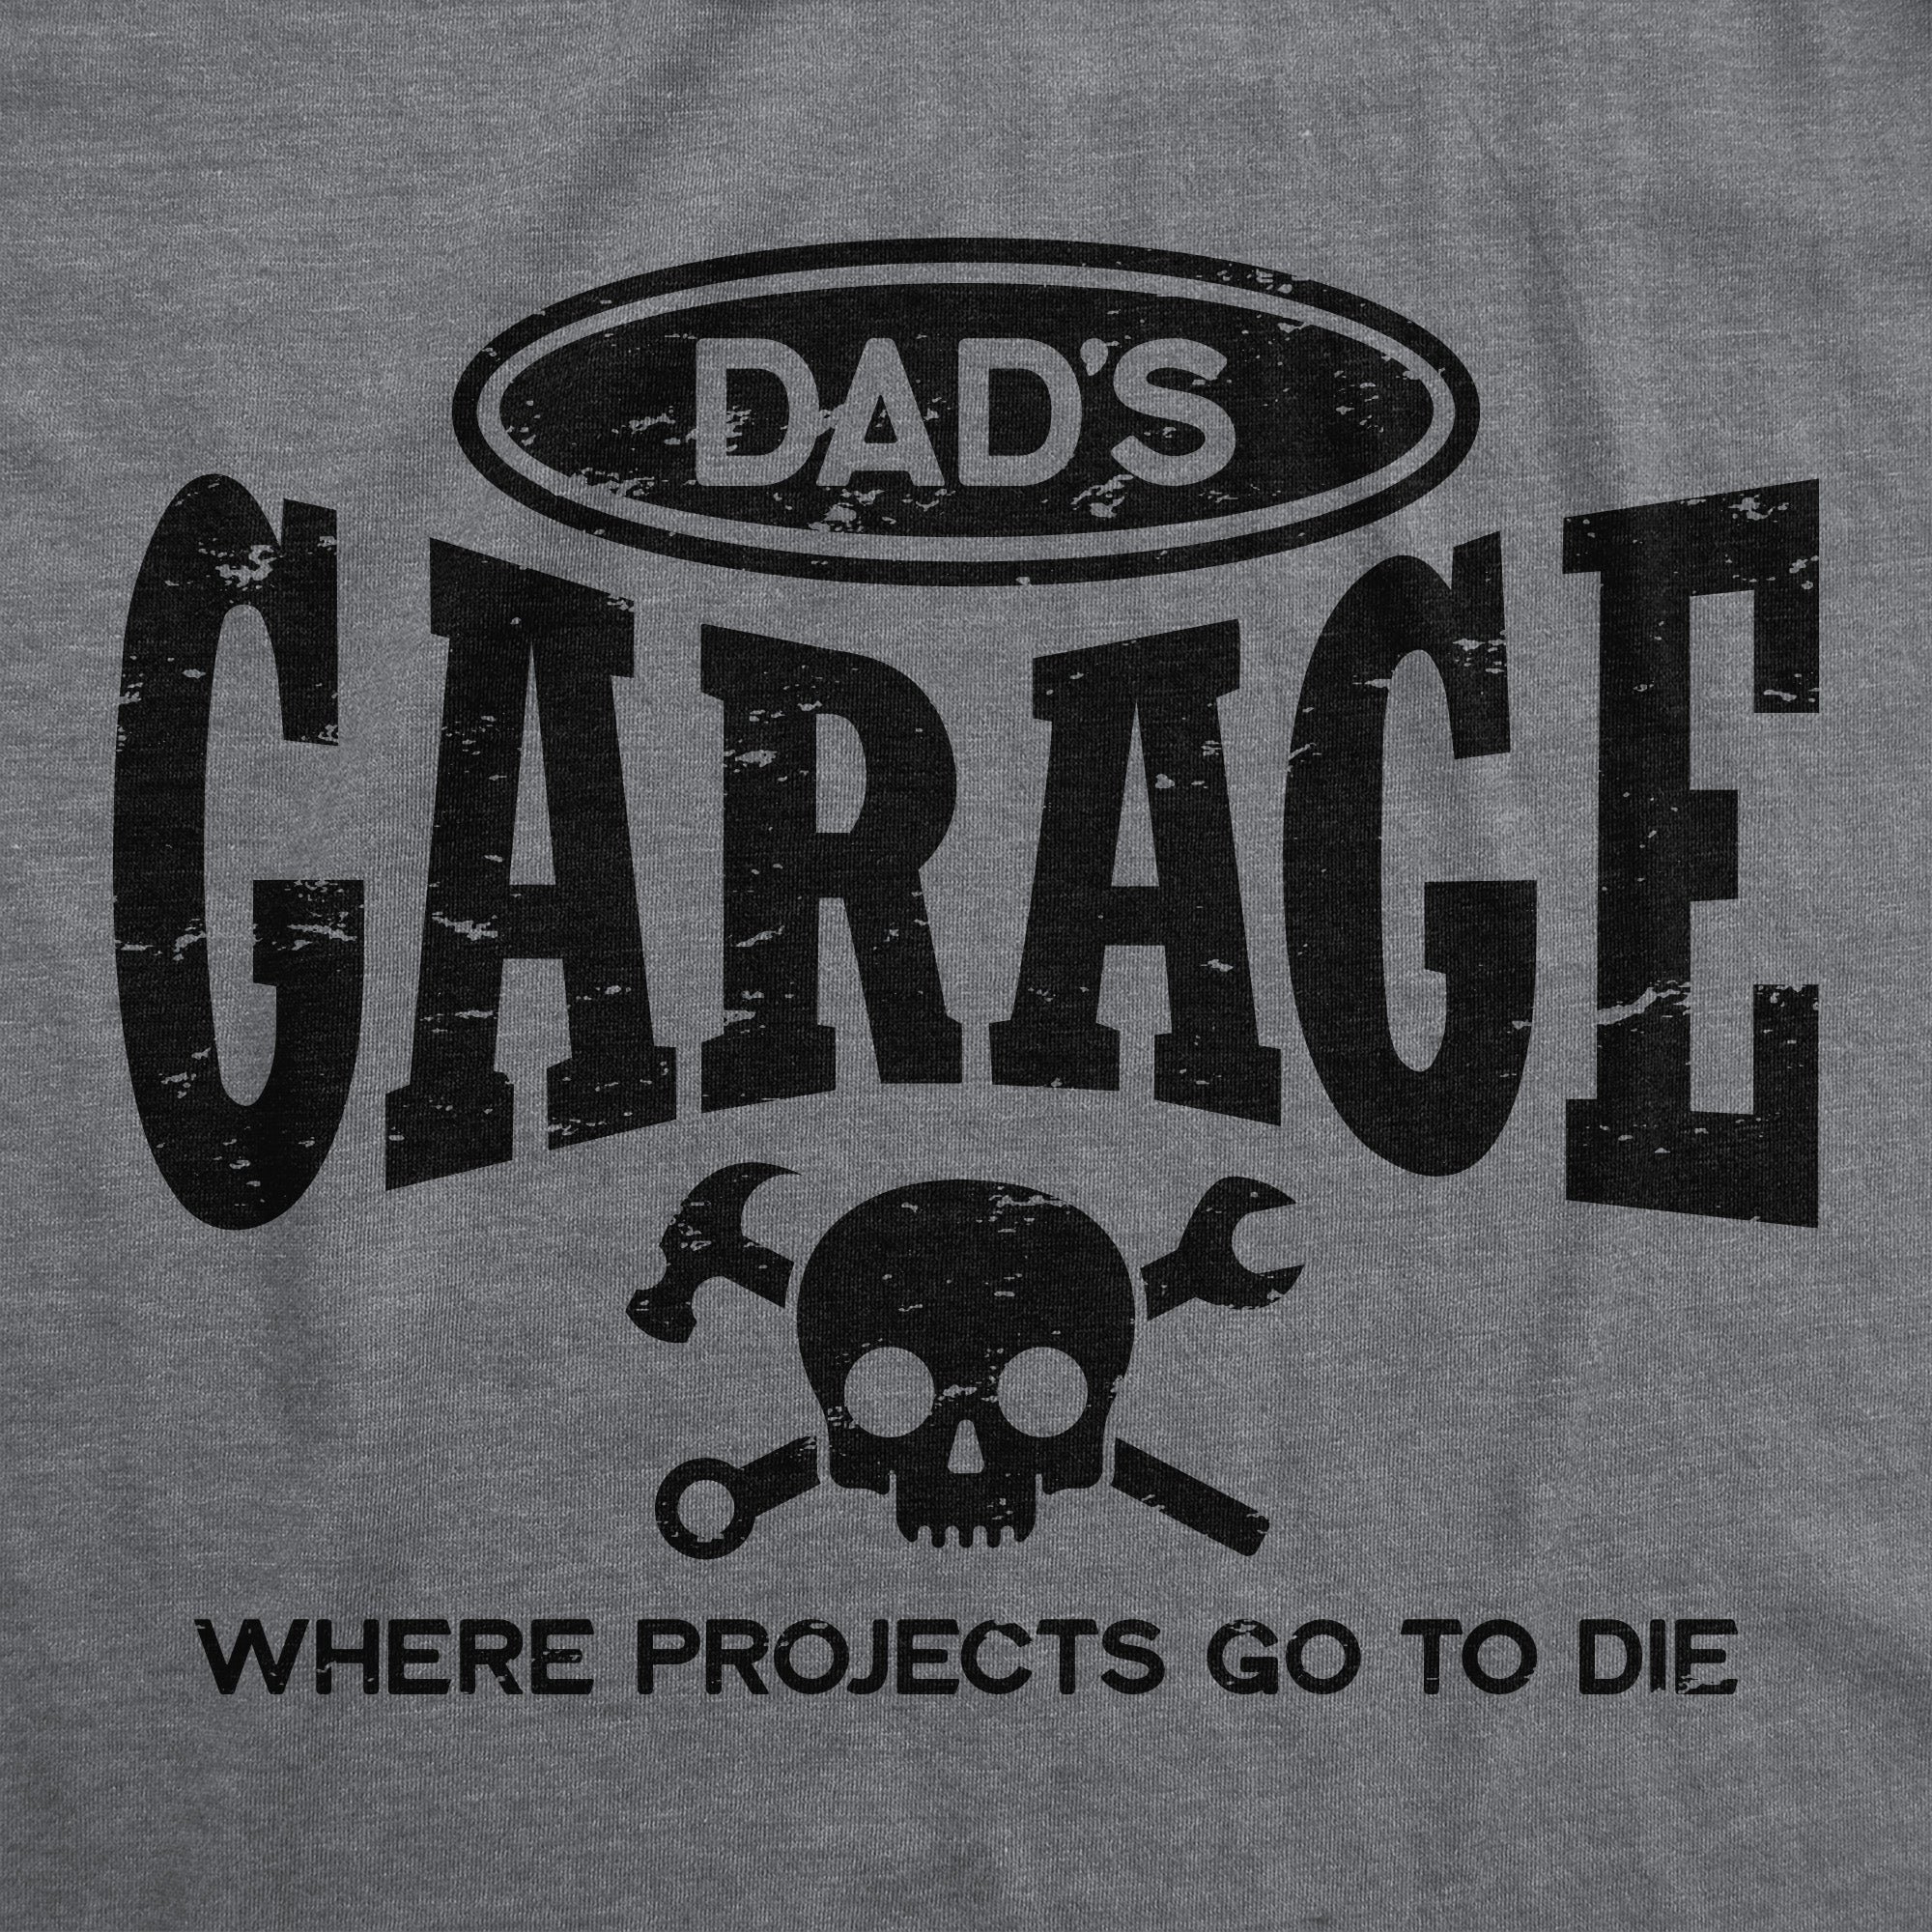 Funny Dark Heather Grey - GARAGE Dads Garage Where Projects Go To Die Mens T Shirt Nerdy Father's Day sarcastic Tee